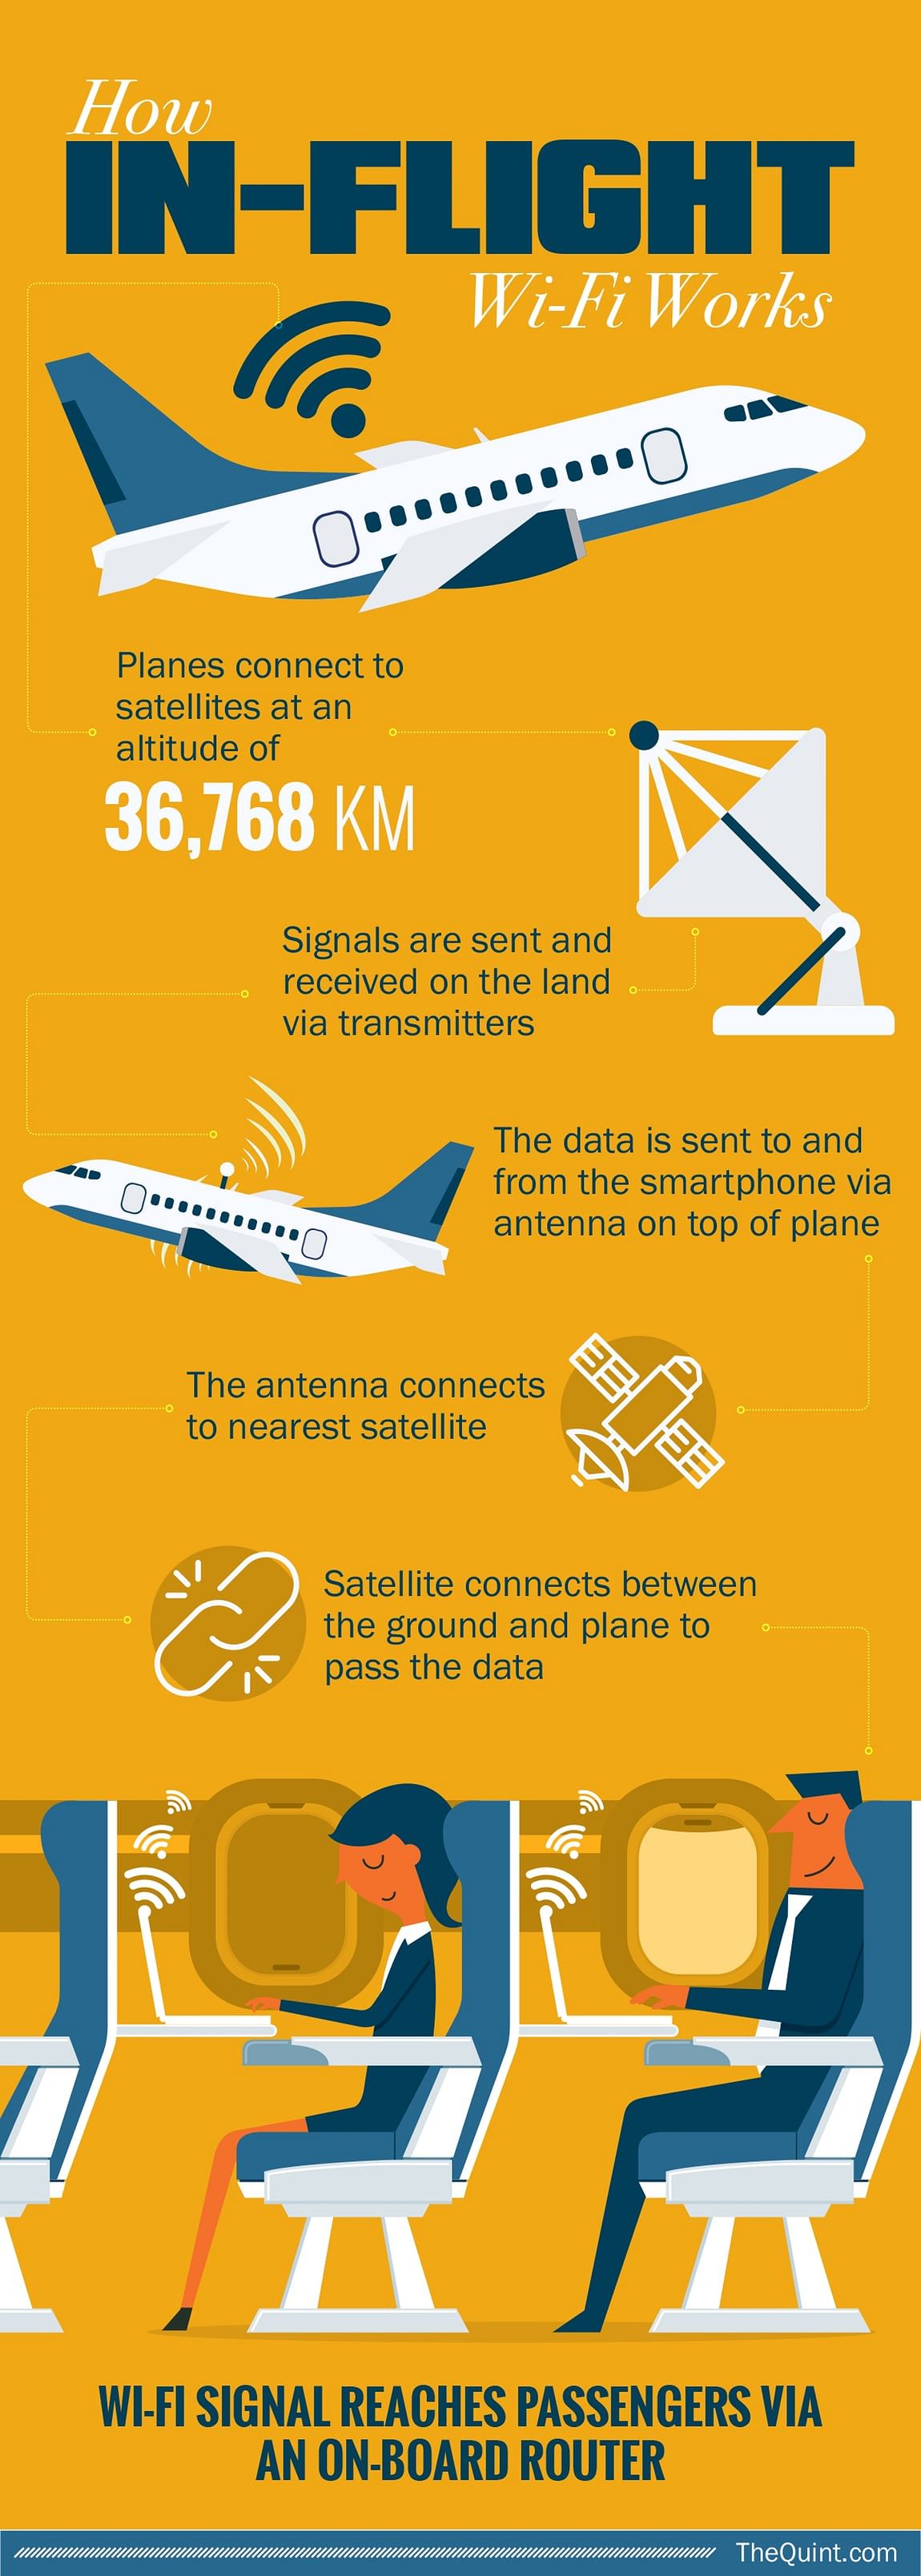 The Quint goes live from 25,000 feet in the air, thanks to in-flight Wi-Fi.